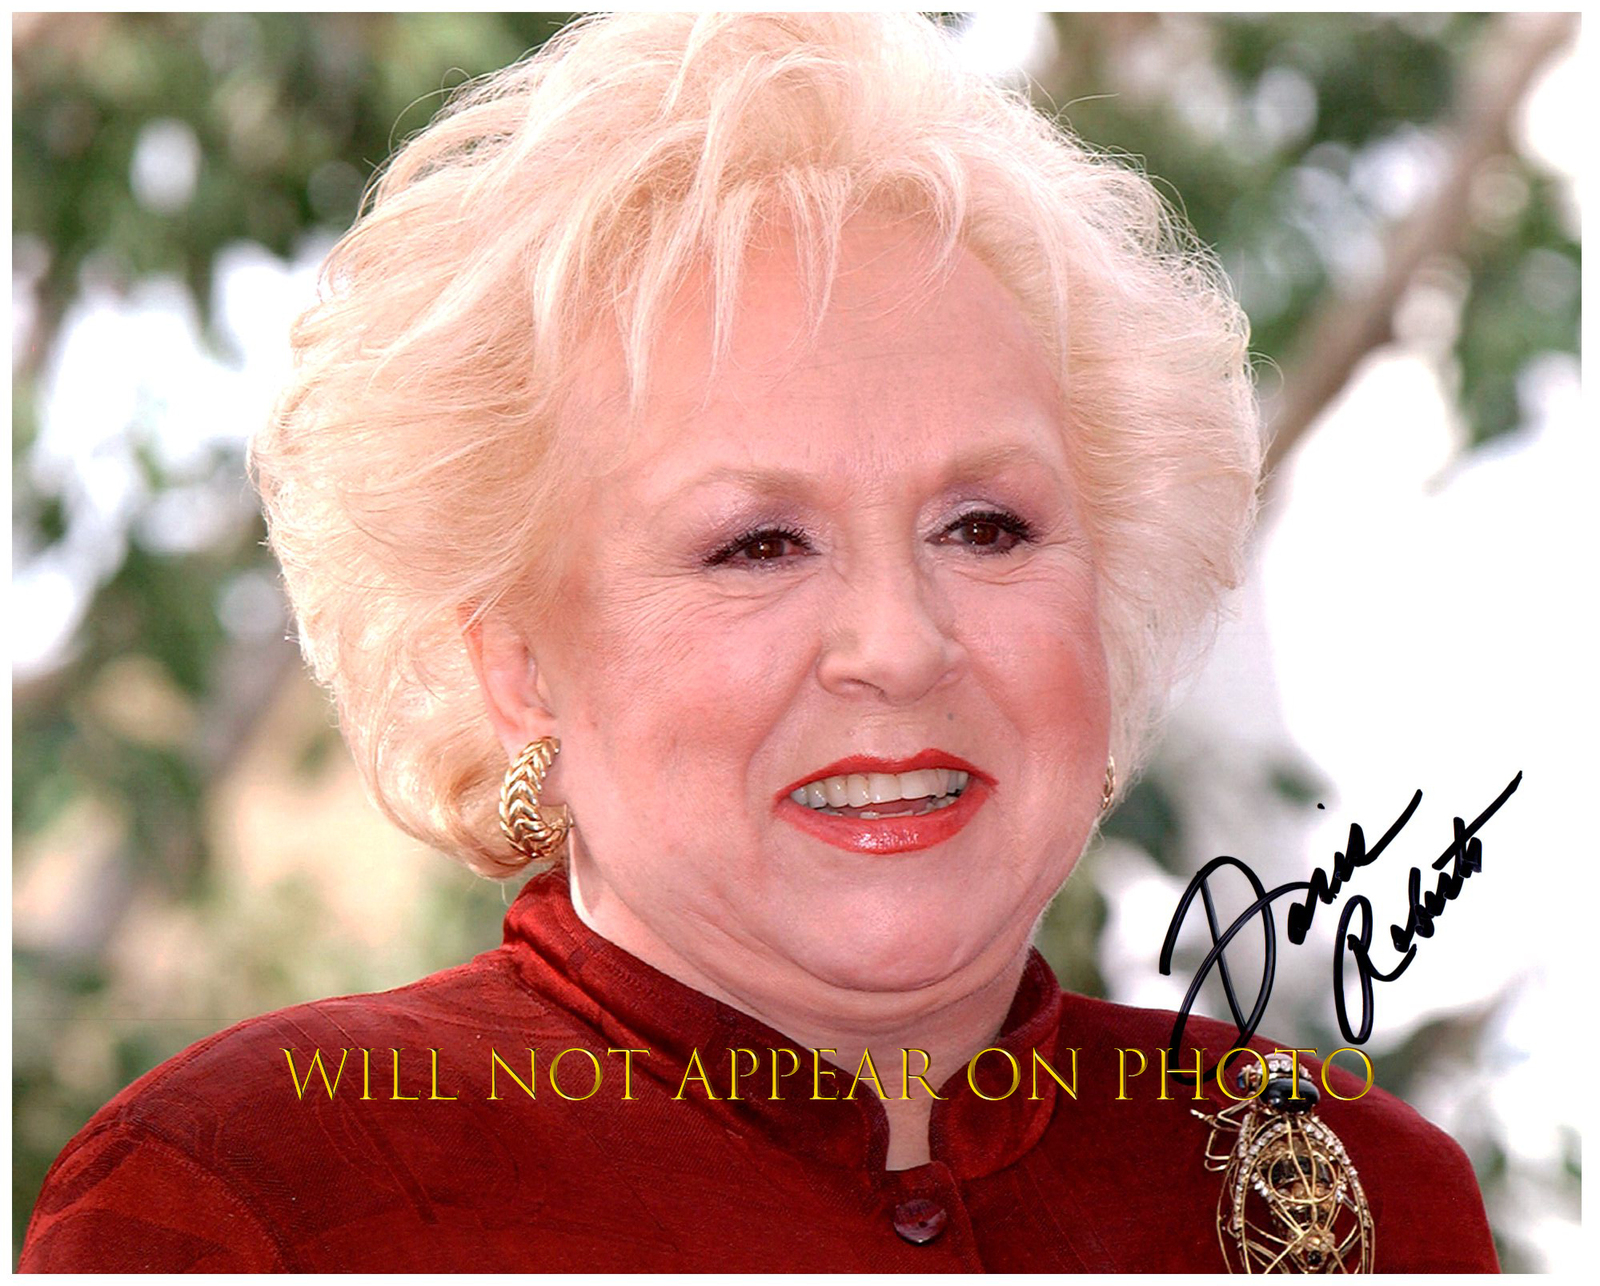 DORIS ROBERTS Signed Autographed 8X10 Photo w/ Certificate of Authenticity 2976 - $38.00